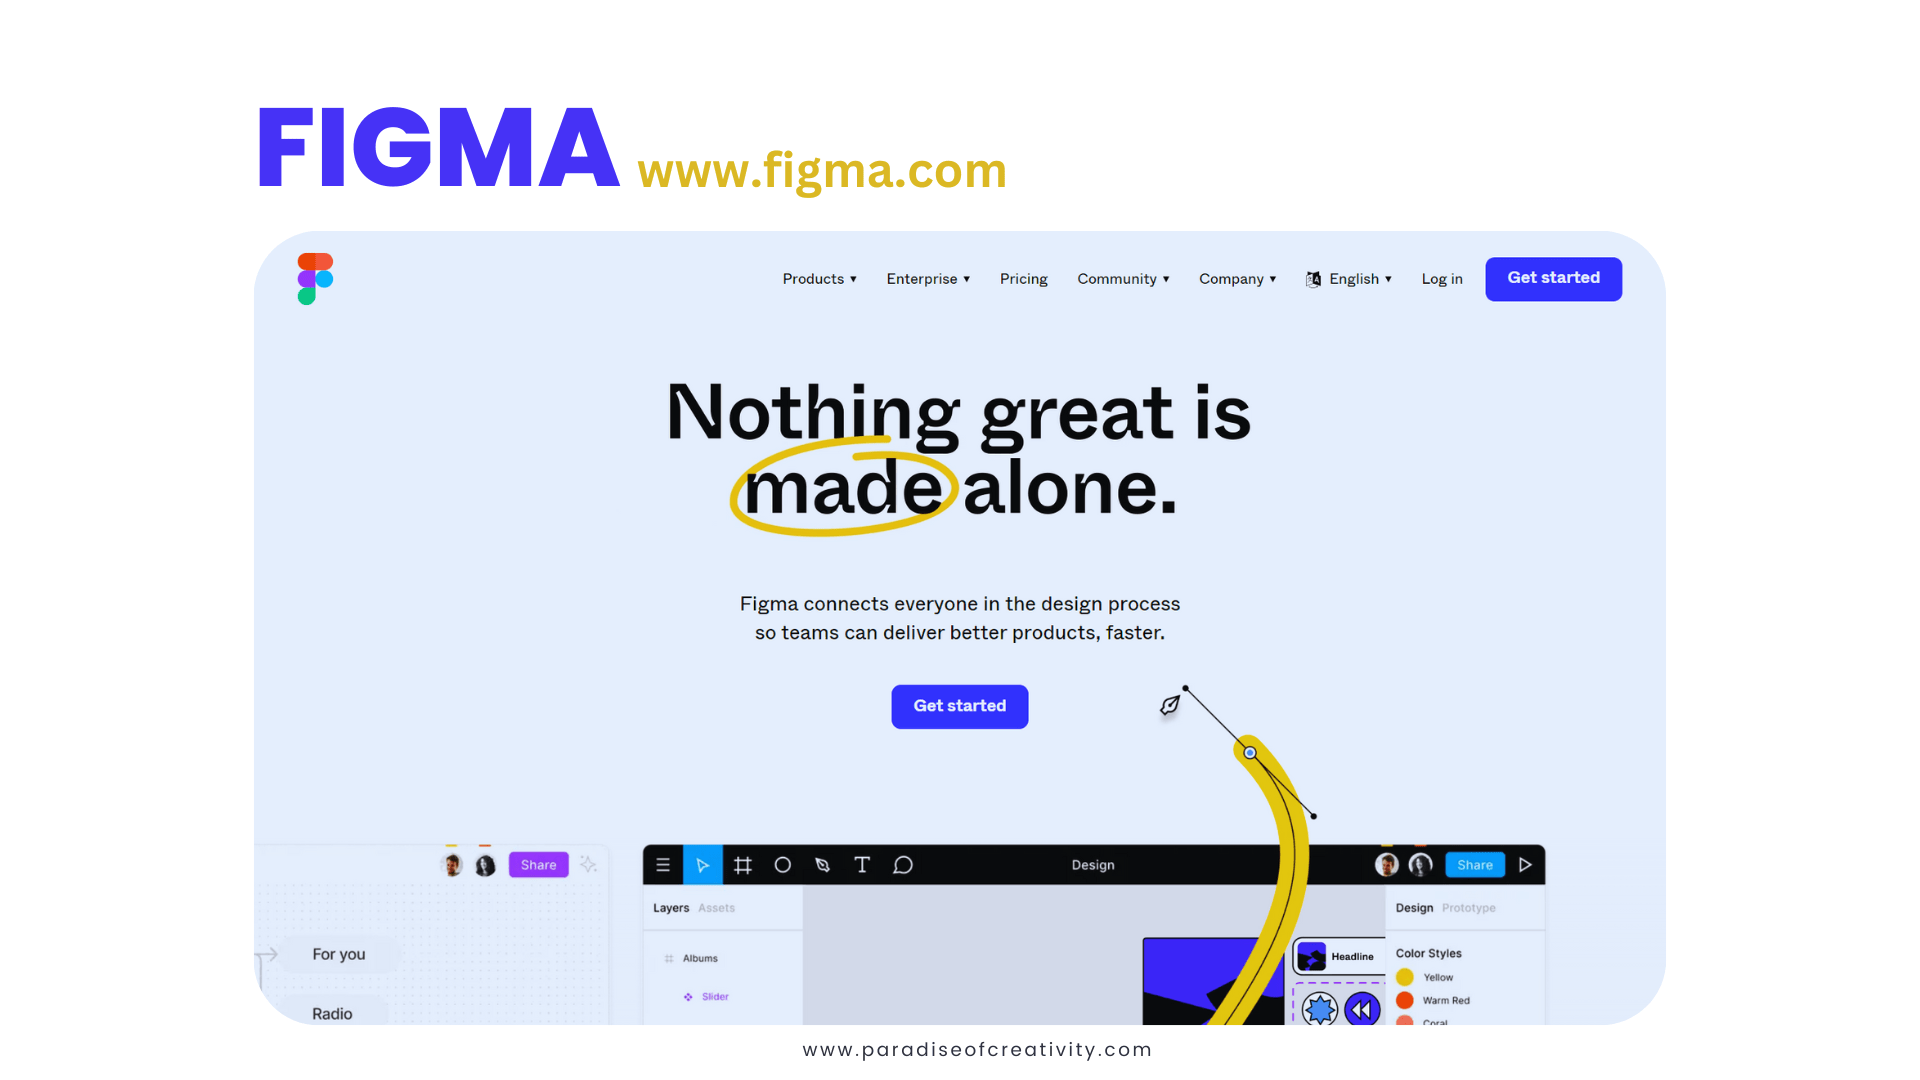 Figma: A cloud-based design tool that enables designers to collaborate and work on designs in real-time. Figma is great for prototyping and offers a range of pre-made design components and templates.